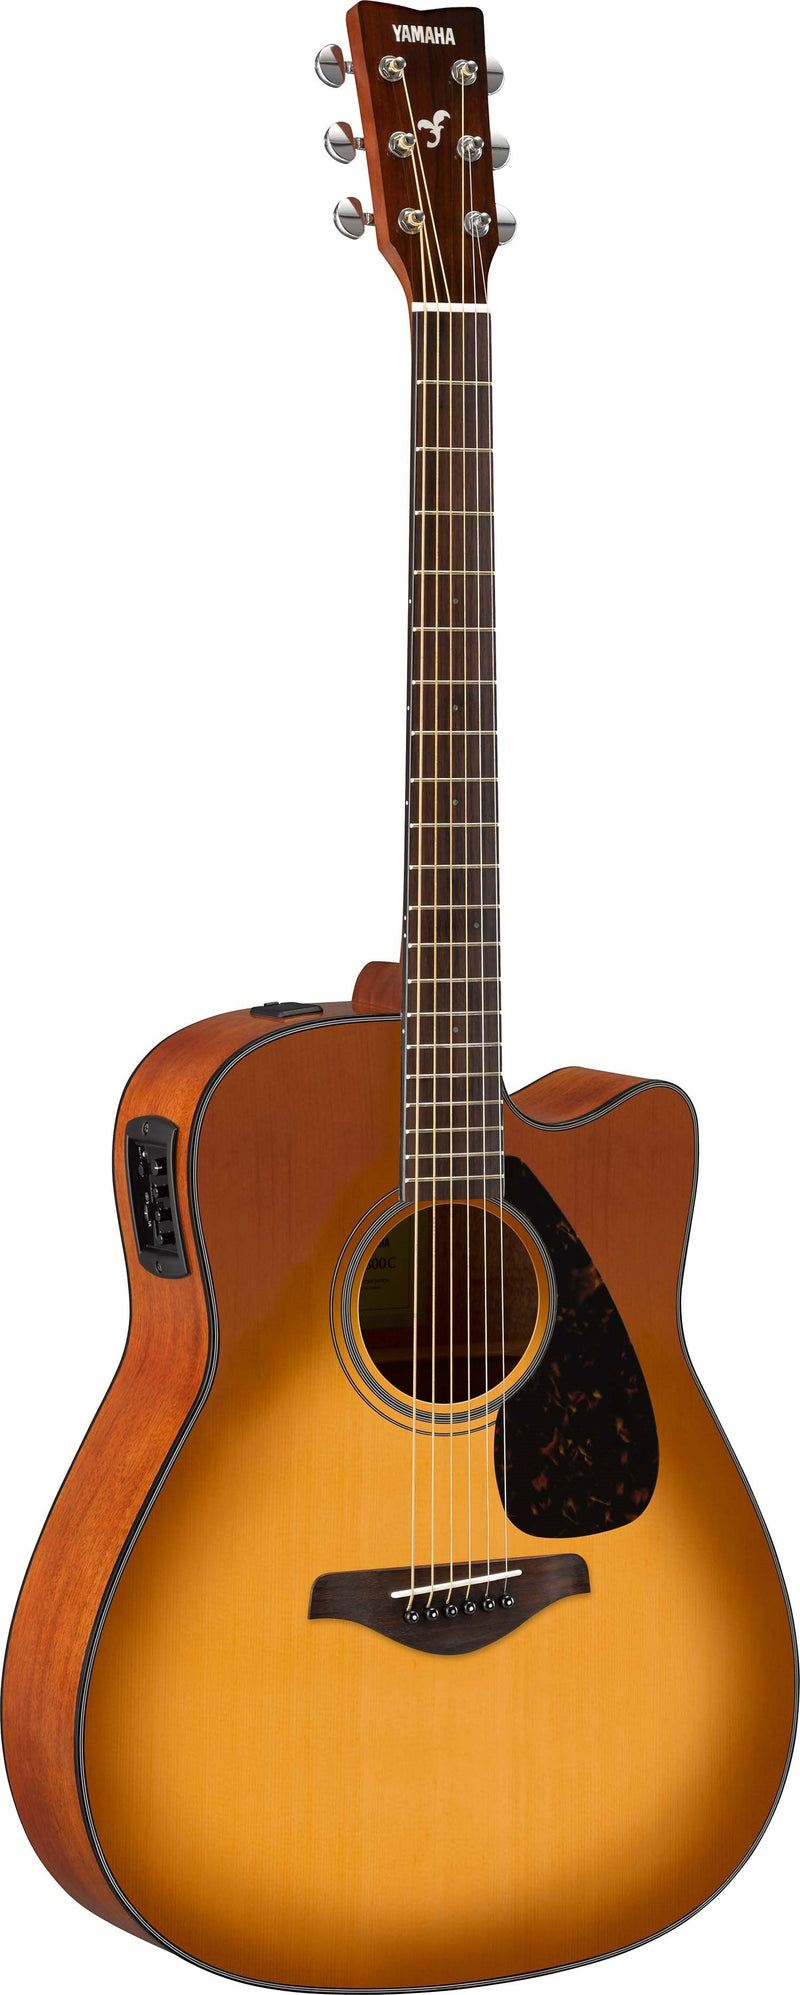 Yamaha FGX800C Acoustic-Electric Dreadnought Guitar